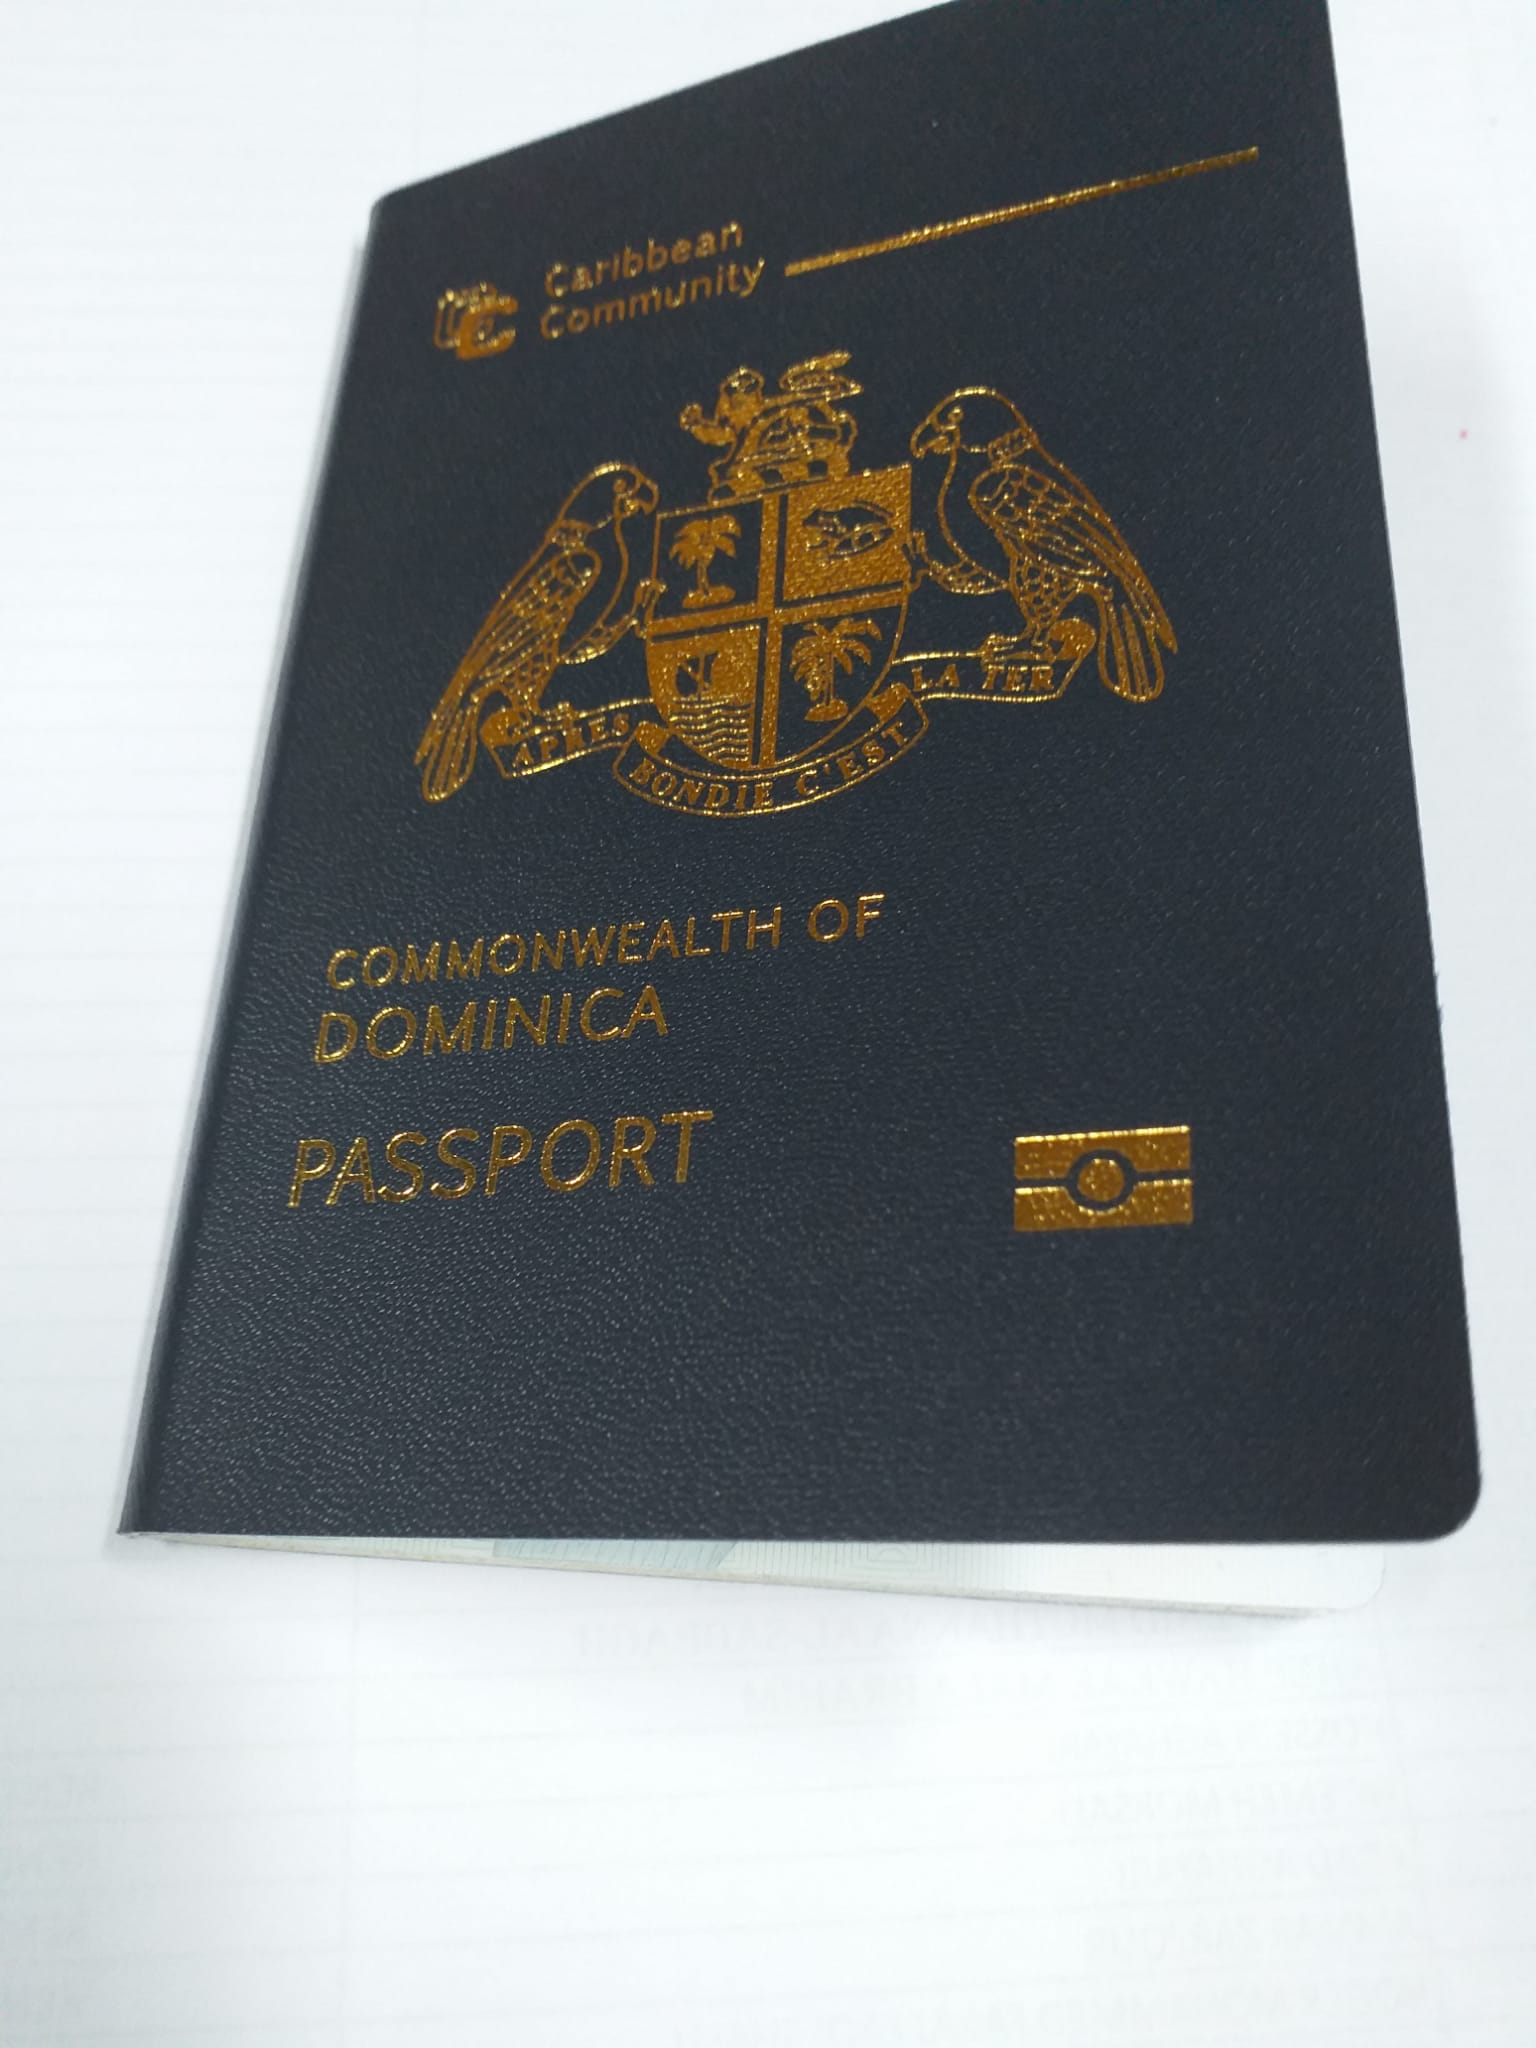 Update Transition To Commonwealth Of Dominica E Passport Mobile Application Units Emonews